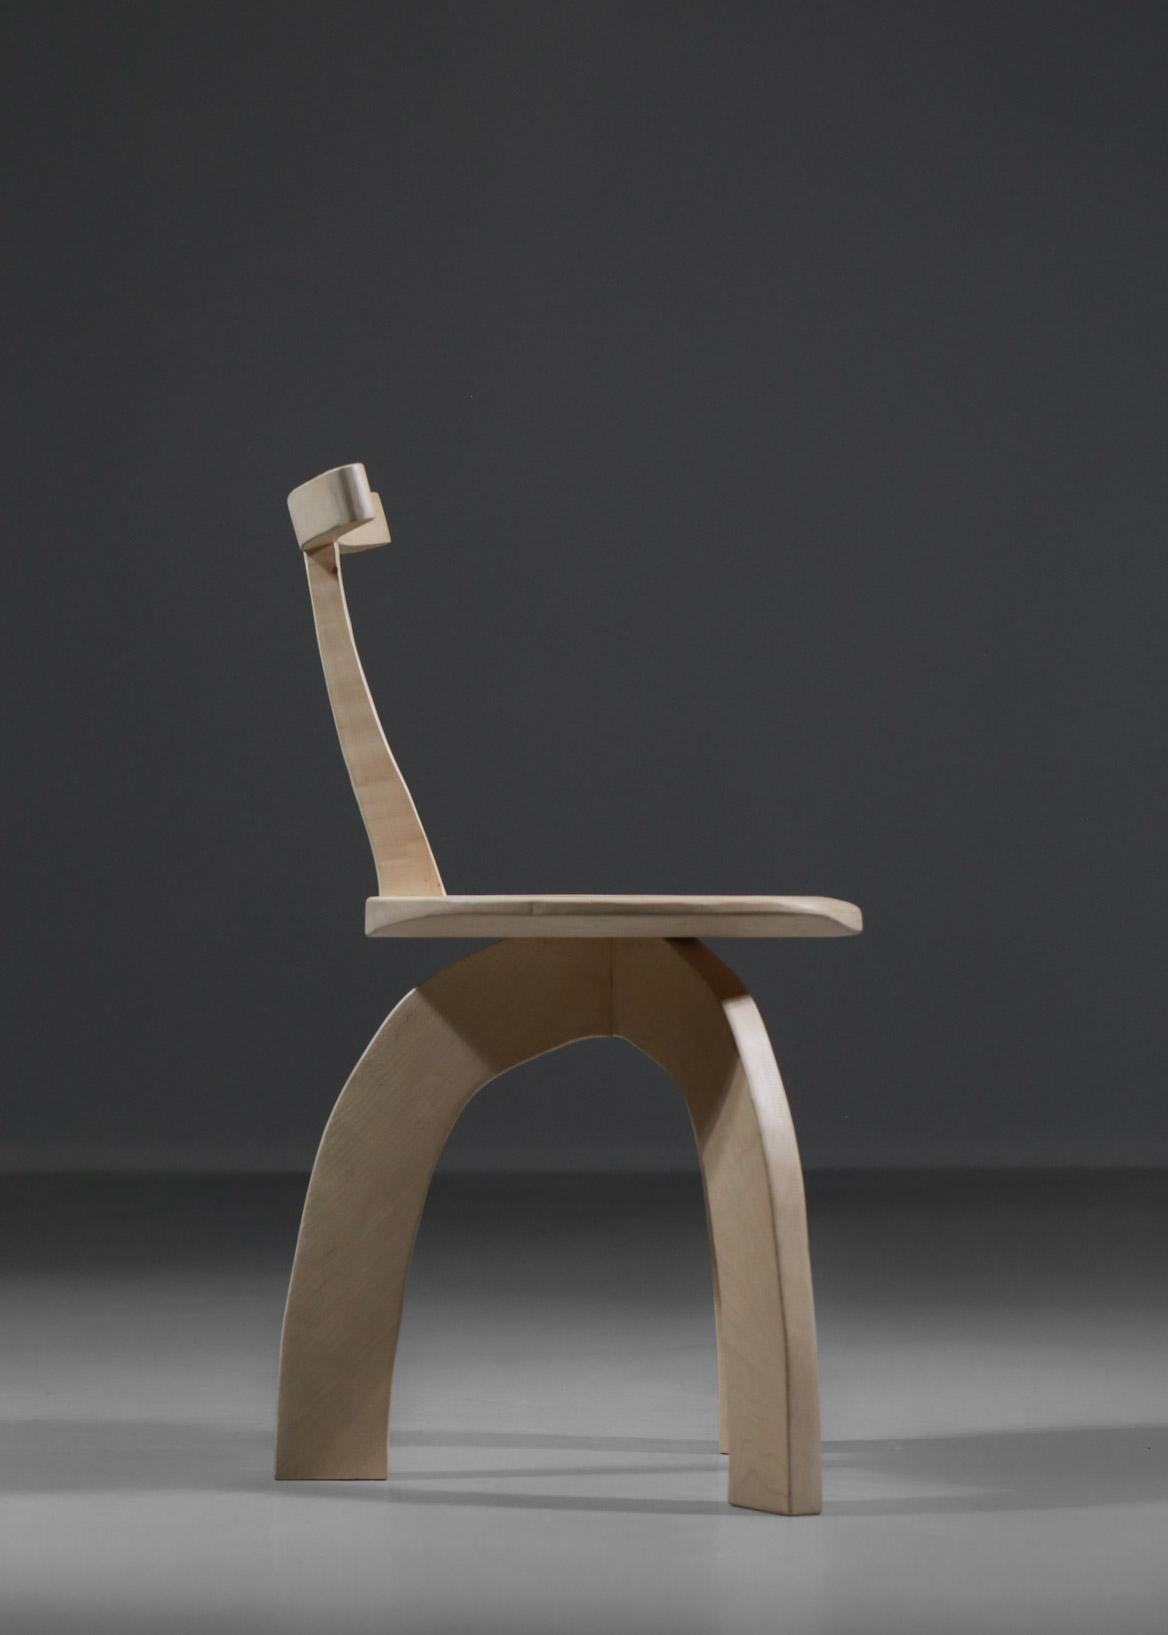 Organic Modern Artisanal Modern 80/20 Oak or Sycamore Chair Created by Vincent Vincent For Sale